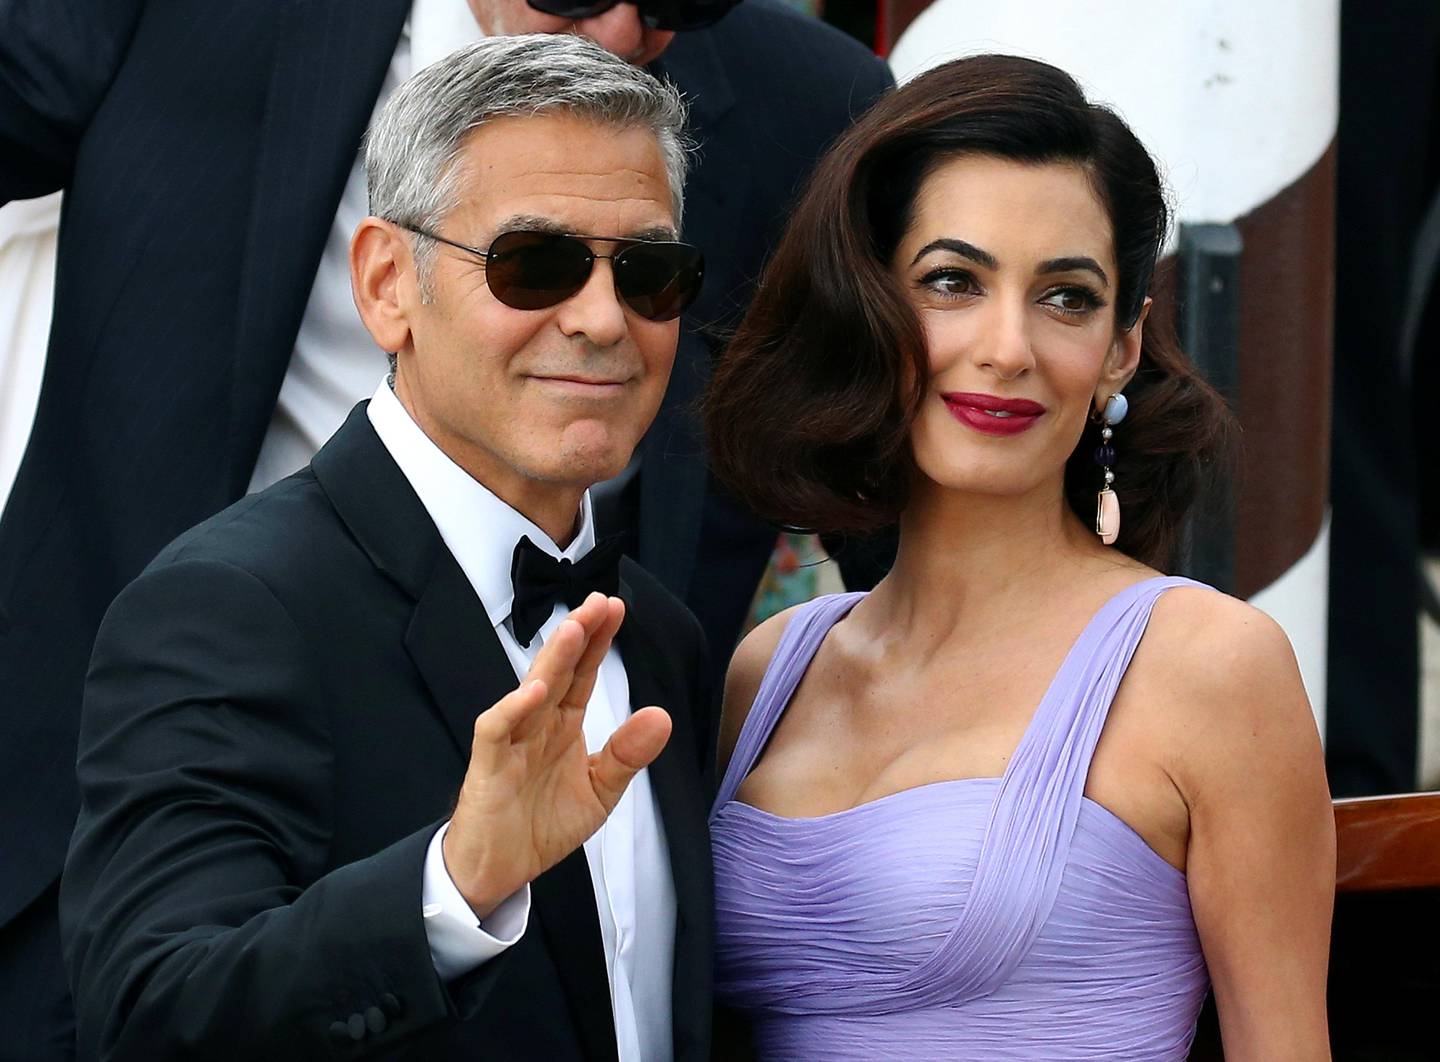 Actor and director George Clooney waves next to his wife Amal as they leave the hotel before the red carpet for the movie Suburbicon at the 74th Venice Film Festival in Venice, Italy September 2, 2017. REUTERS/Alessandro Bianchi